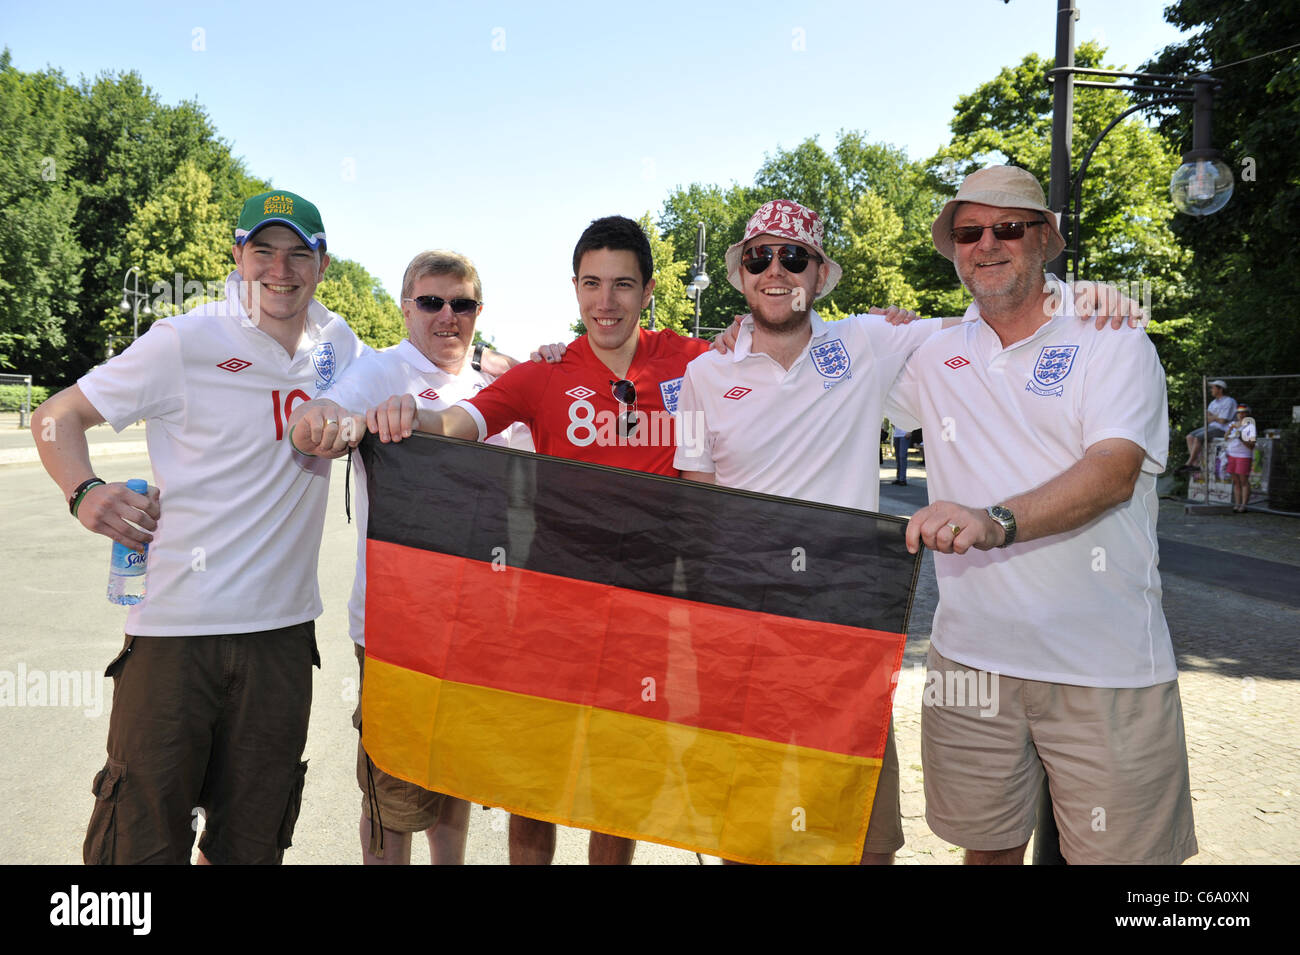 England fans arriving at the International FIFA Fan Fest at the Fanmeile on Strasse des 17. Juni street. Berlin, Germany - Stock Photo